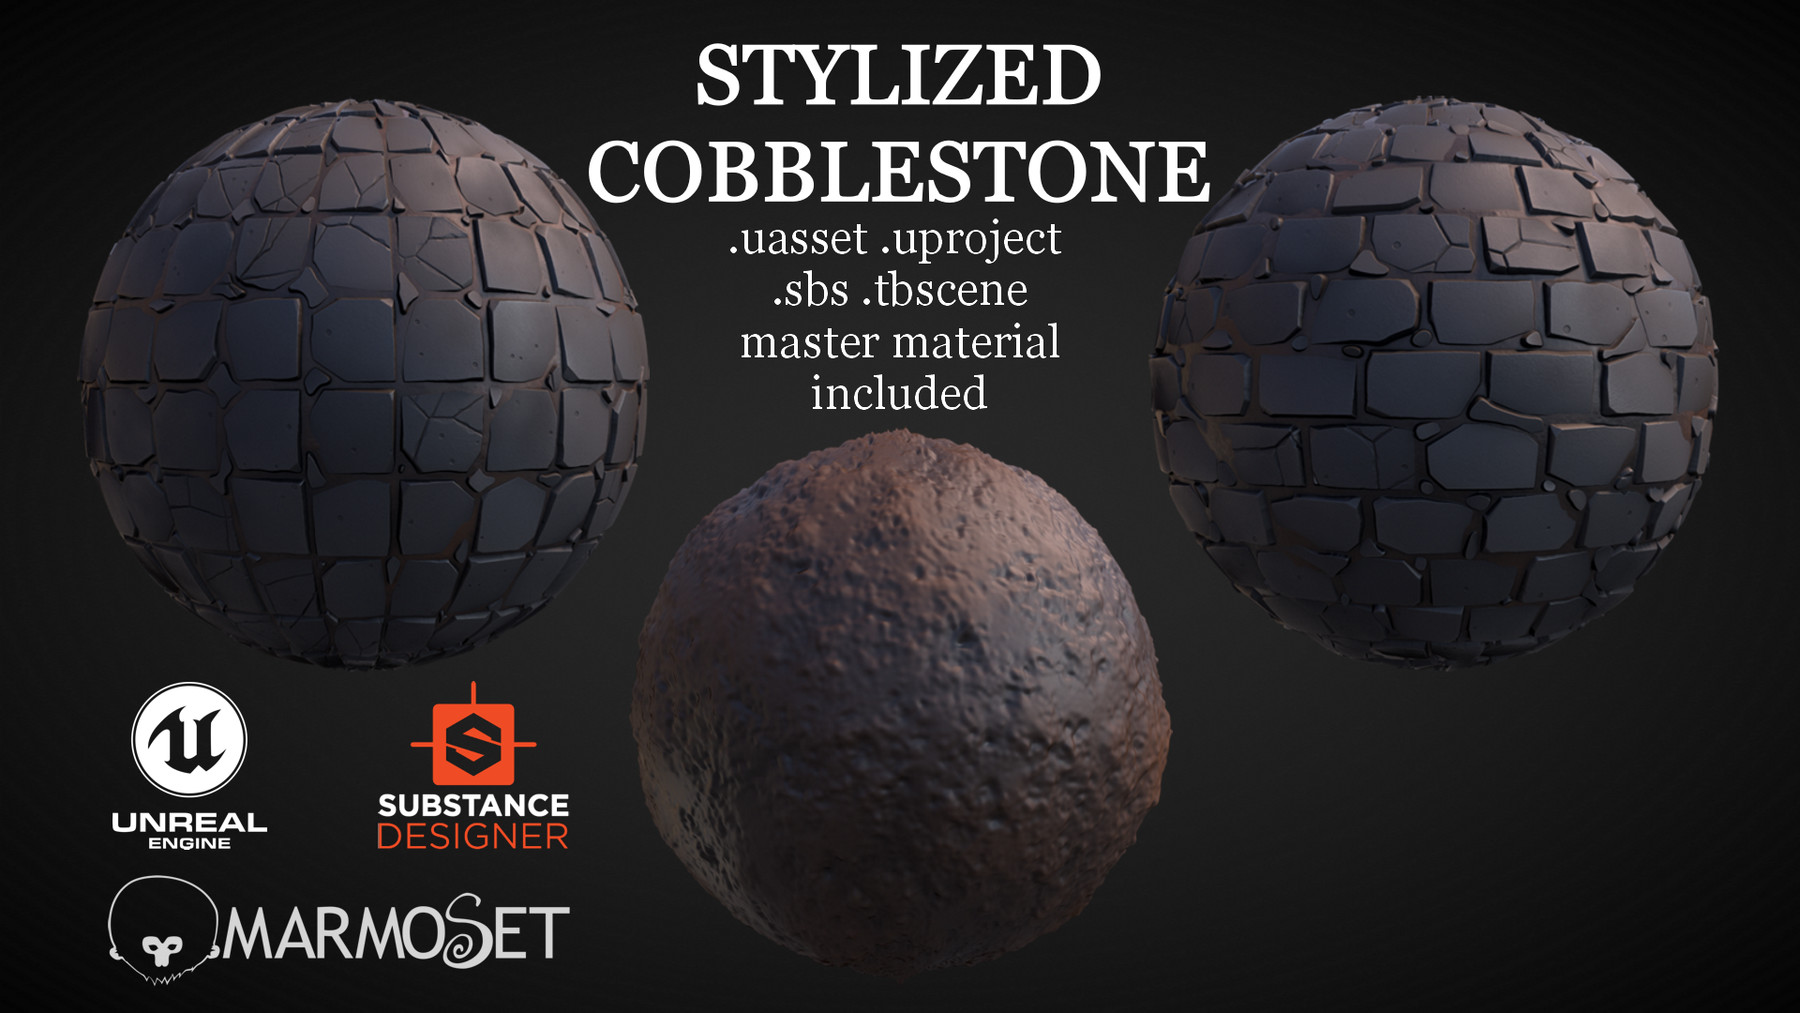 ArtStation - Stylized Cobblestone Material Pack | Game Assets